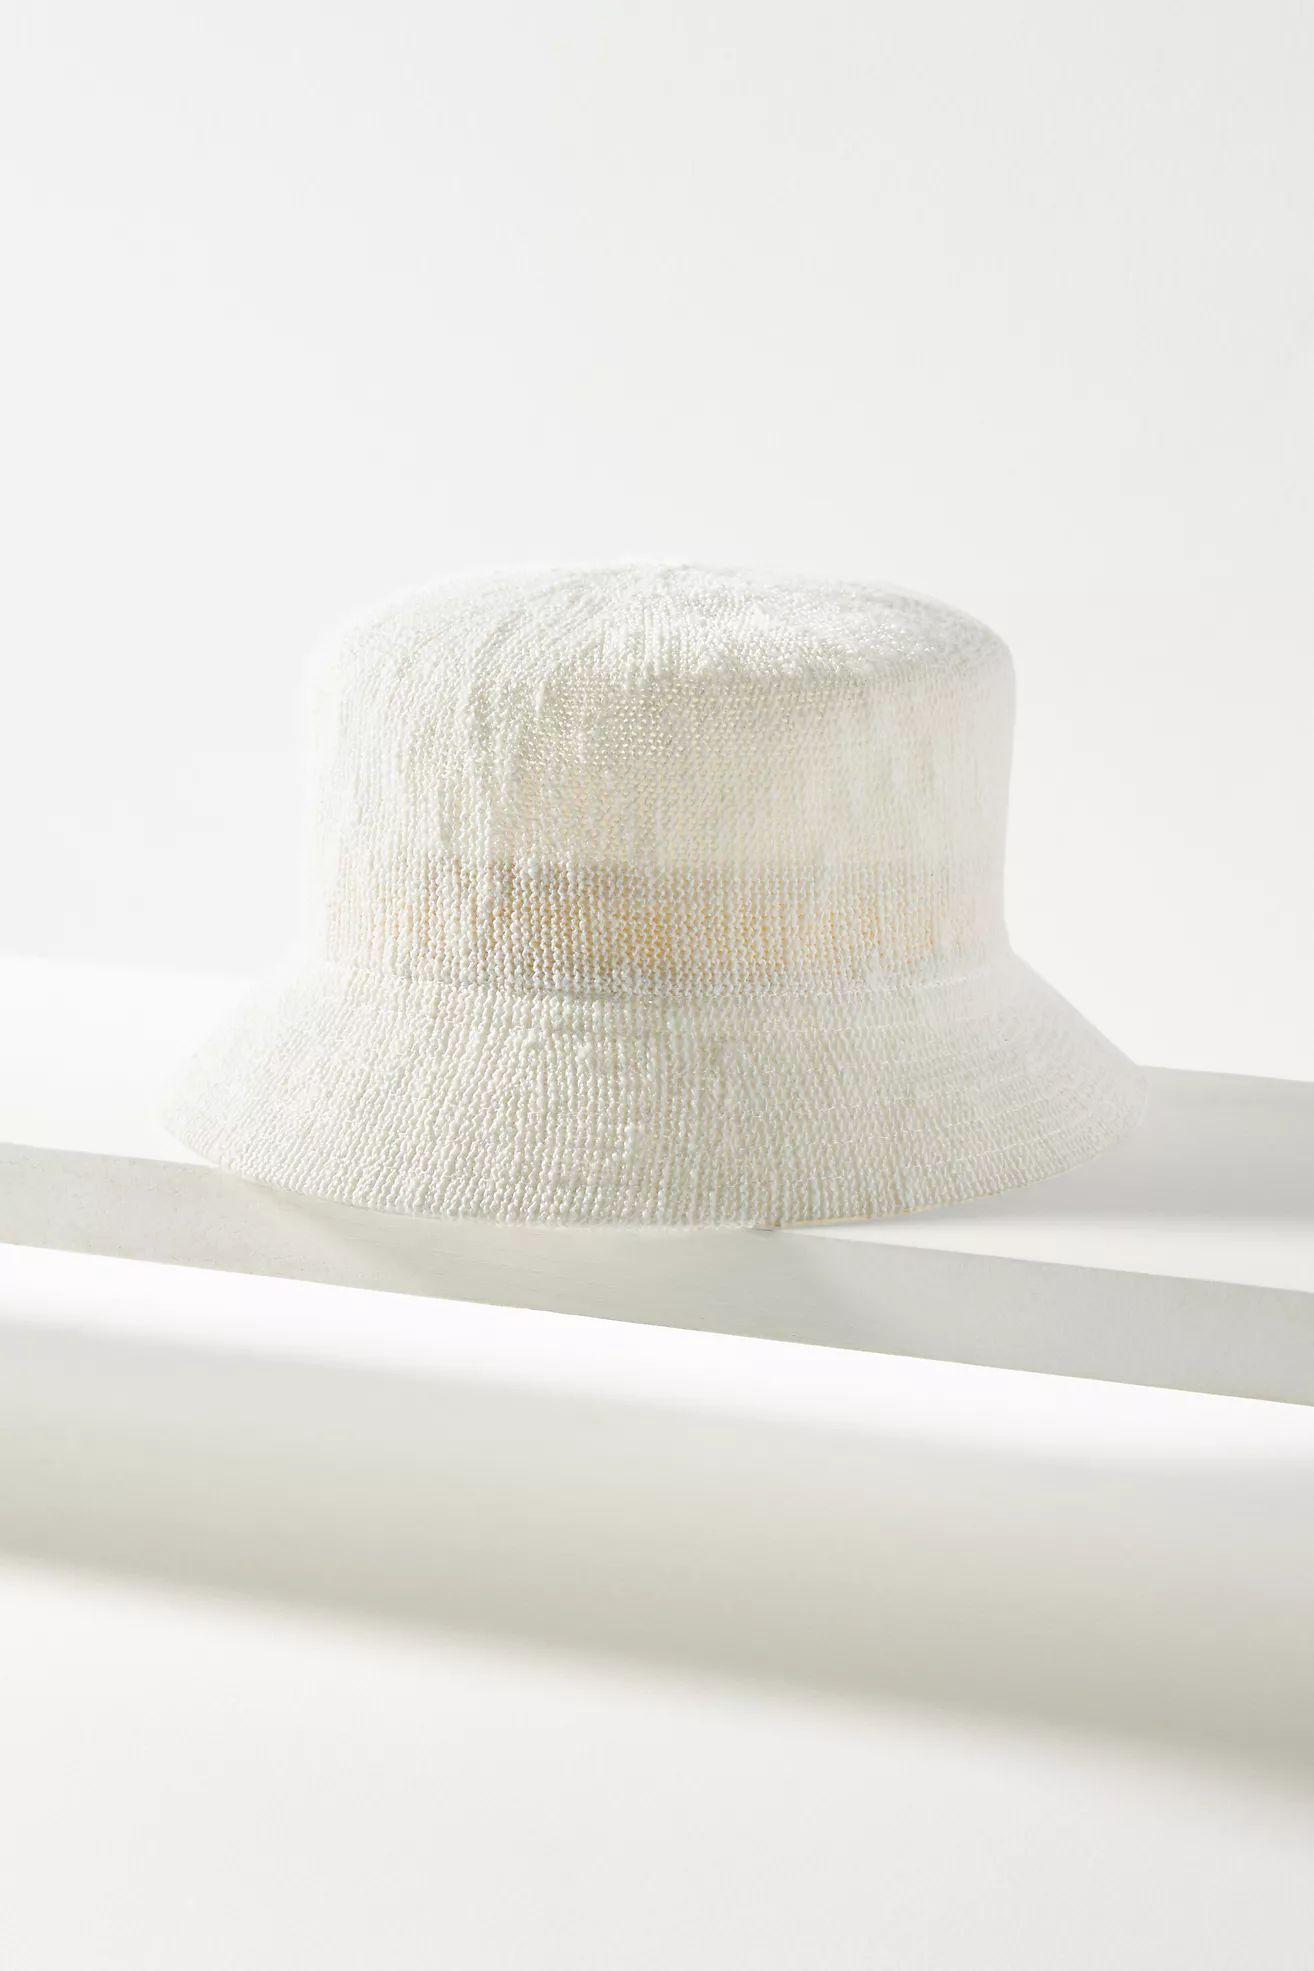 By Anthropologie Nubby Bucket Hat | Anthropologie (US)